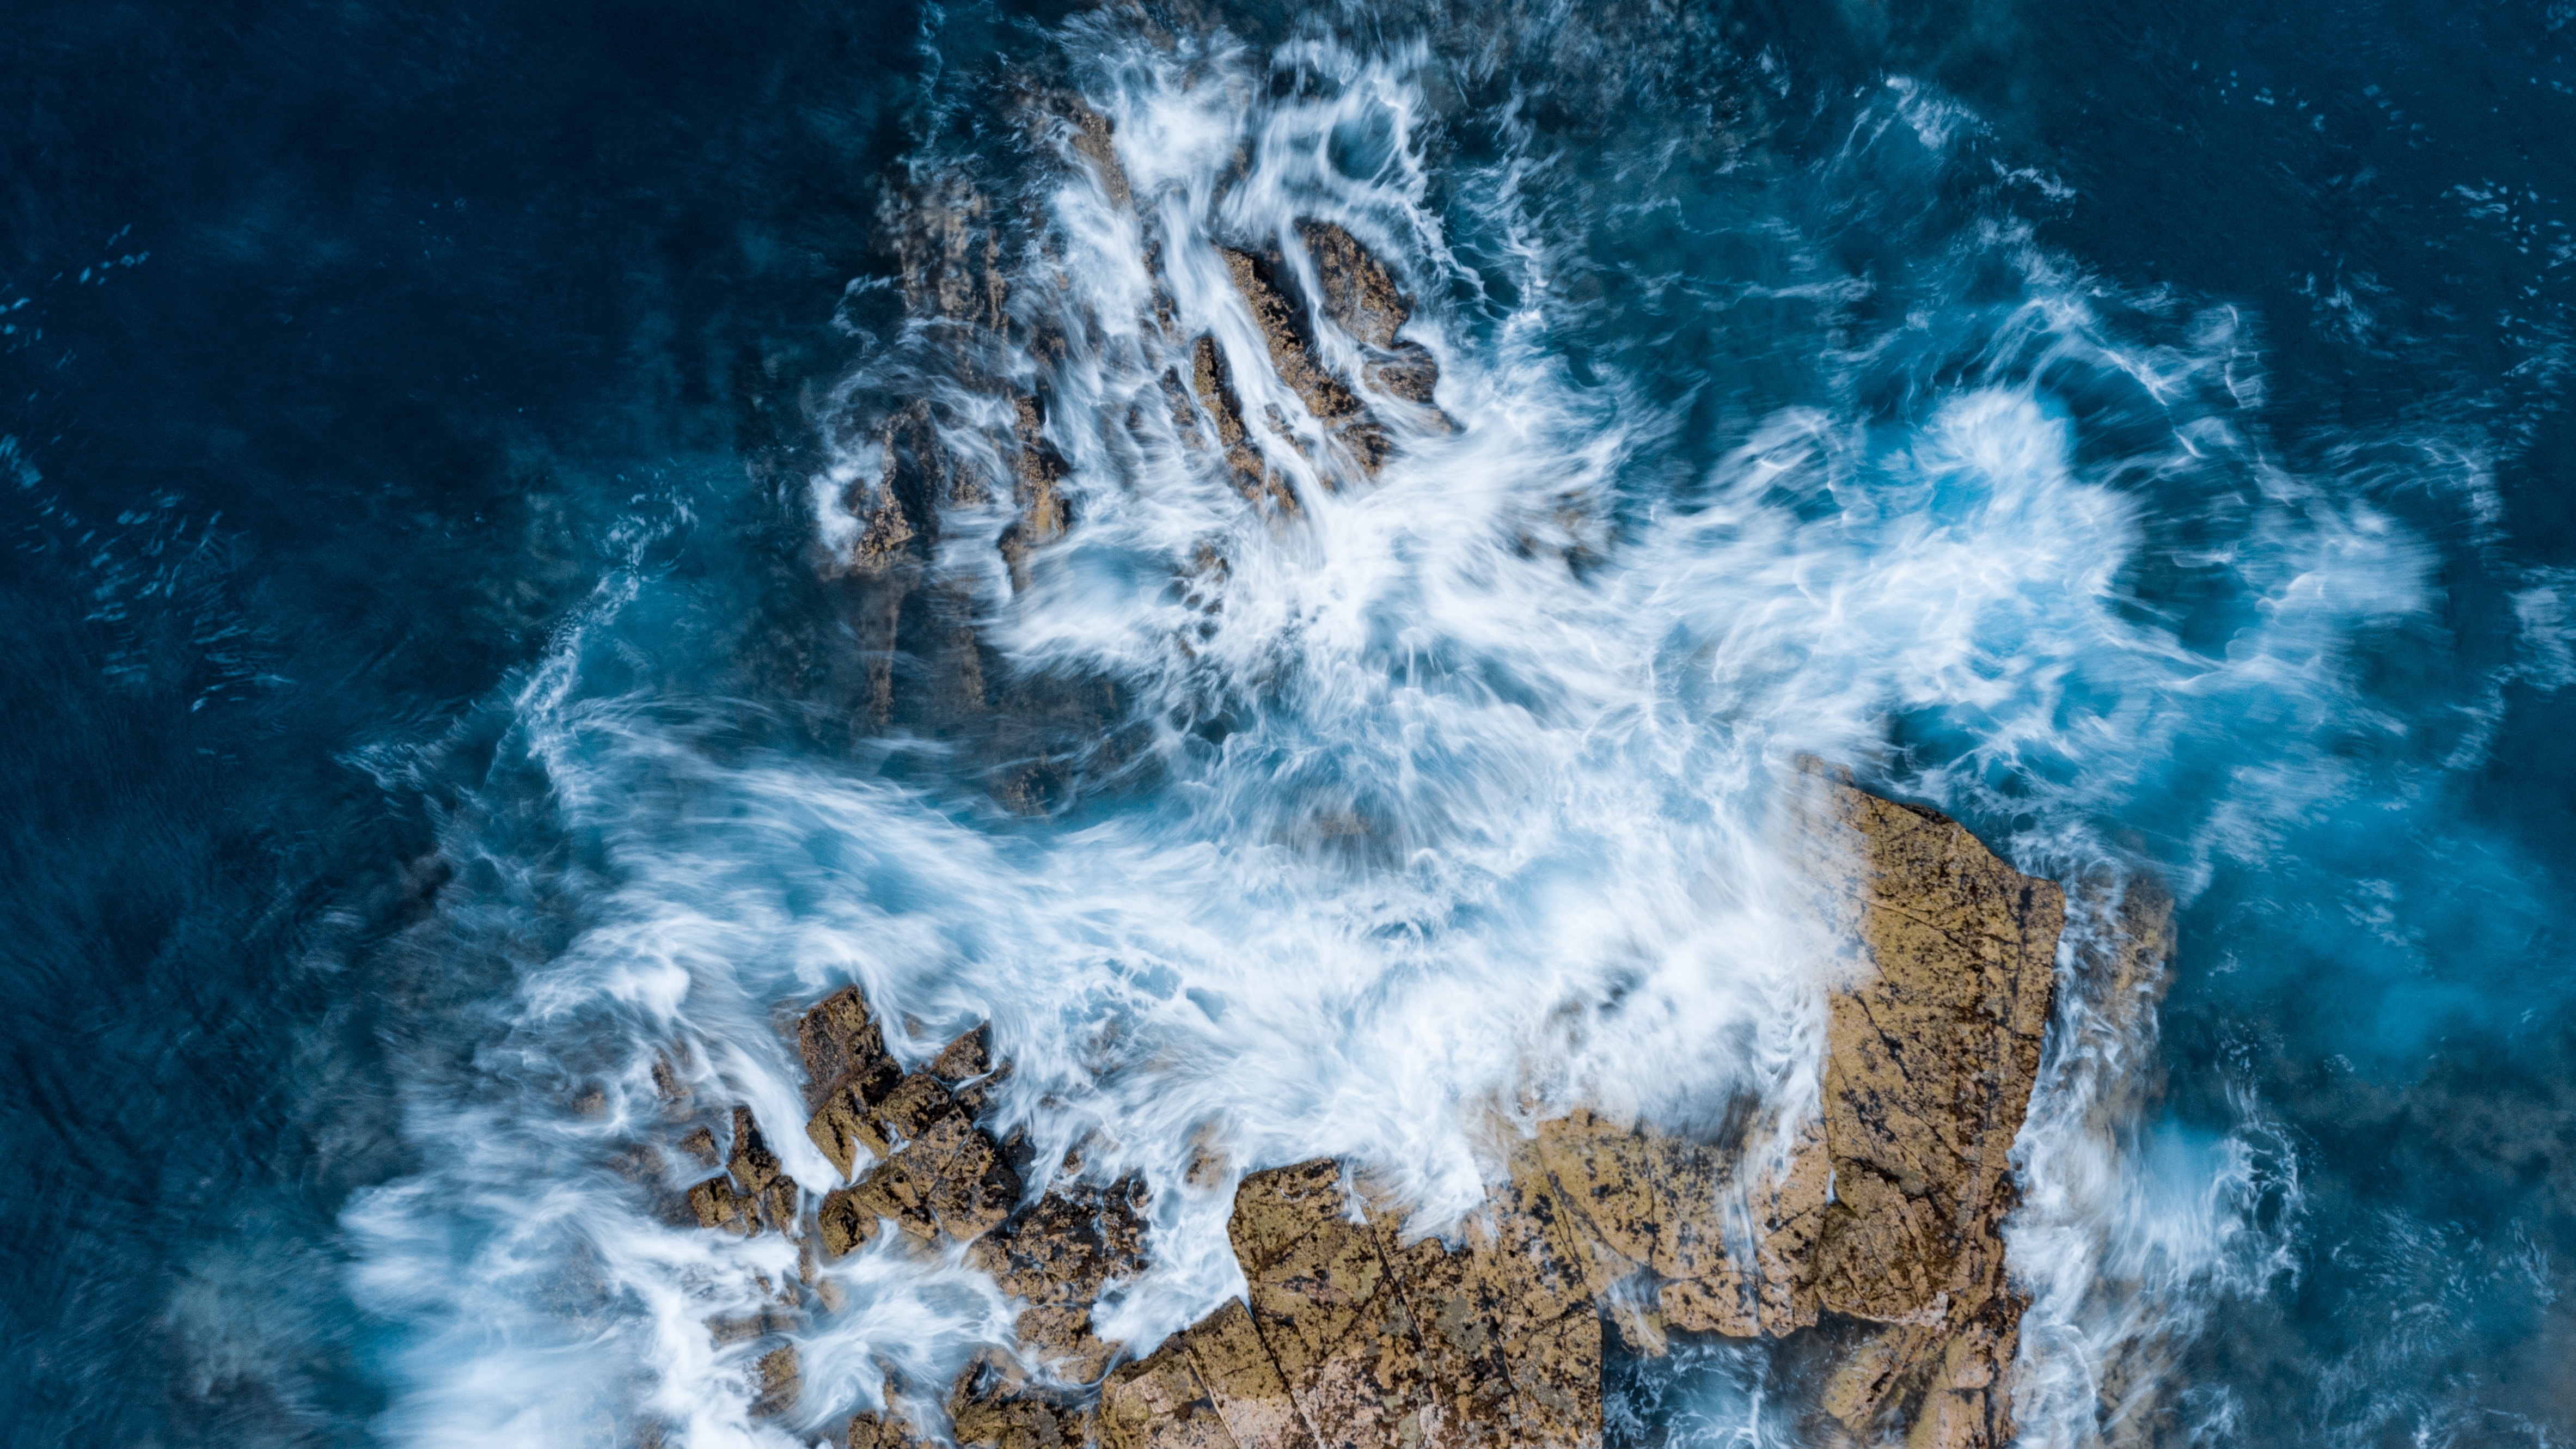 Full HD nature, water, waves, sea, rocks, view from above